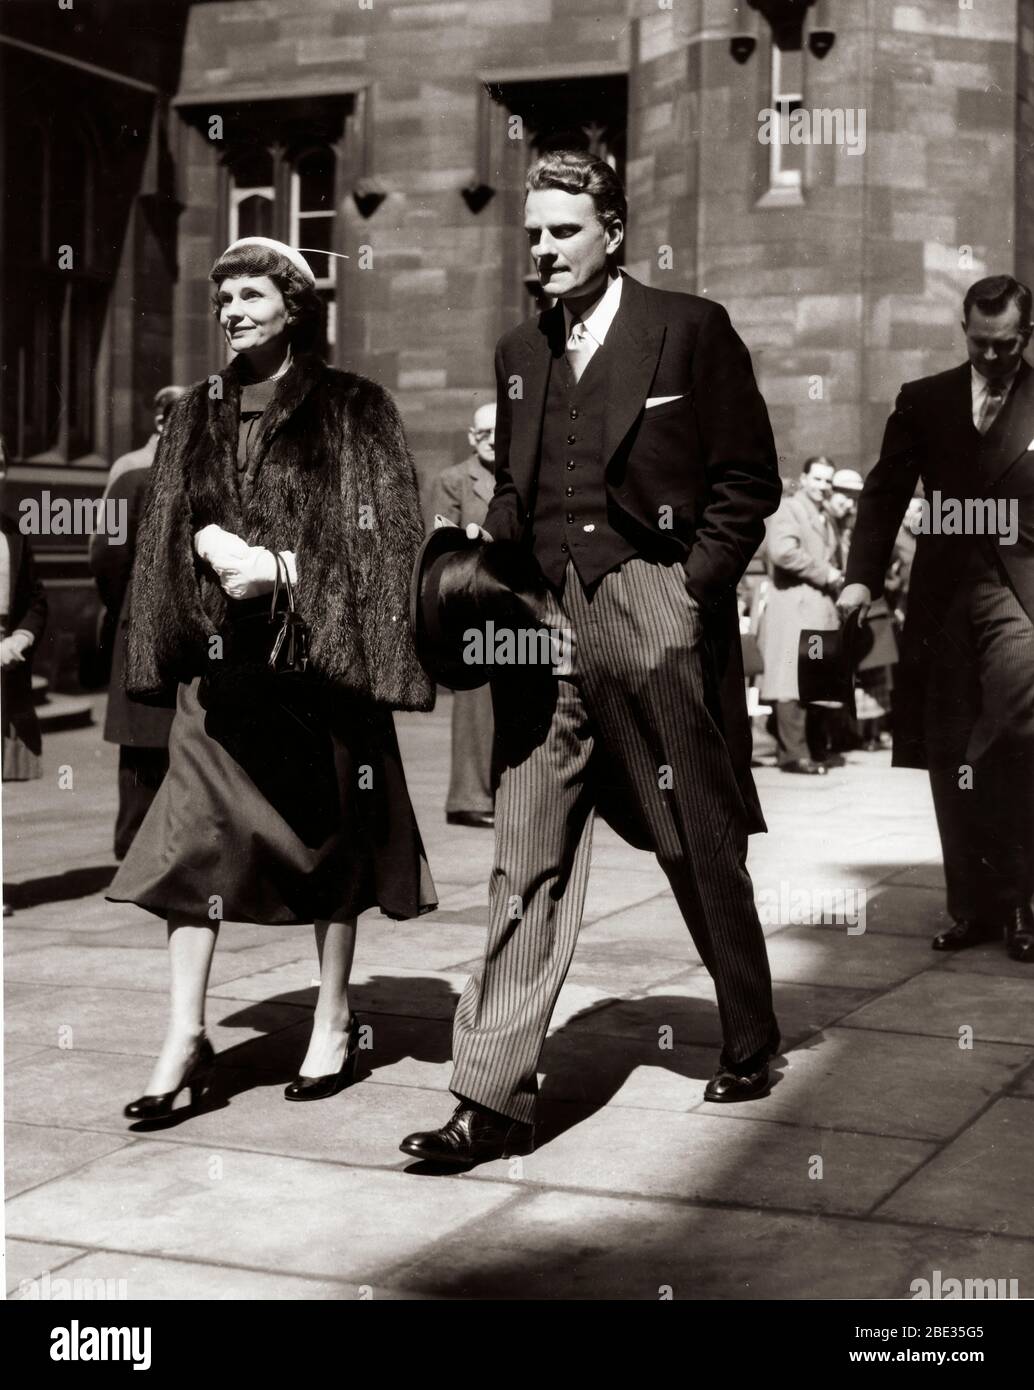 Oct. 2, 1960 - London, England, U.K. - BILLY GRAHAM, born William Franklin Graham, Jr. on November 7, 1918, is an evangelical Christian reverend.  He gained celebrity status by broadcasting his sermons on radio and television. PICTURED: Reverend Billy Graham walking with wife RUTH GRAHAM. Stock Photo